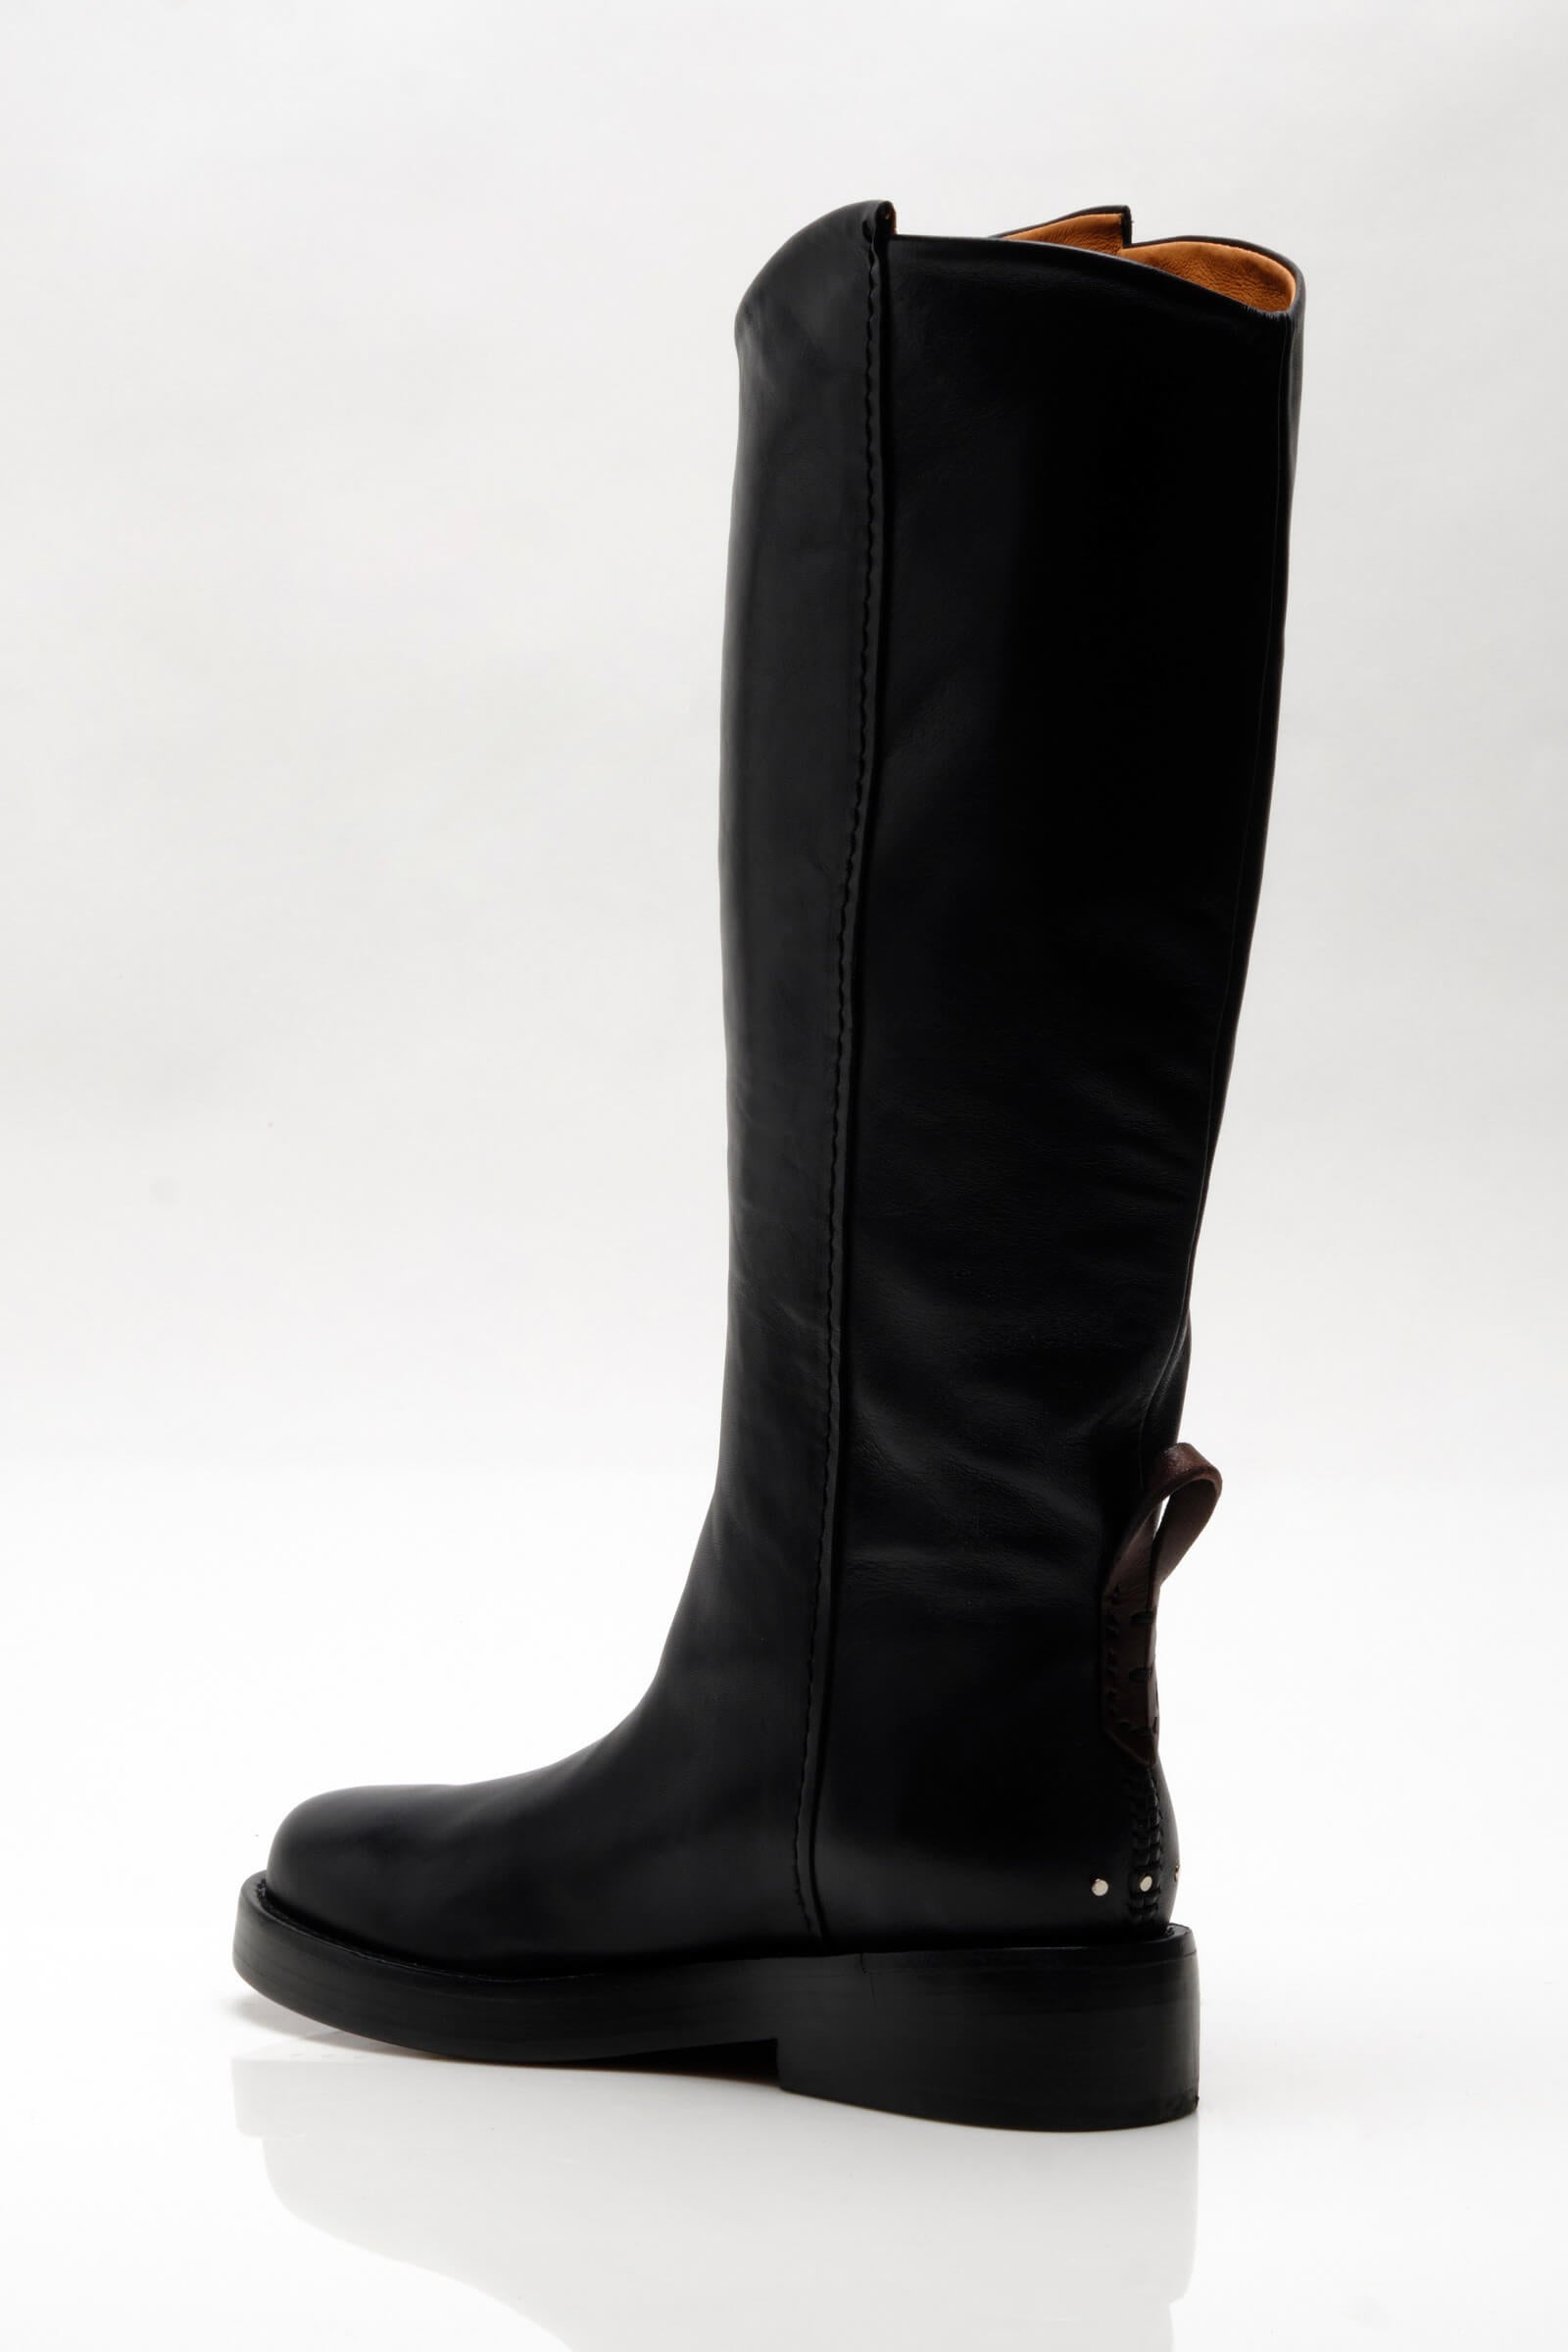 Free People Bryce Equestrian Boot in black